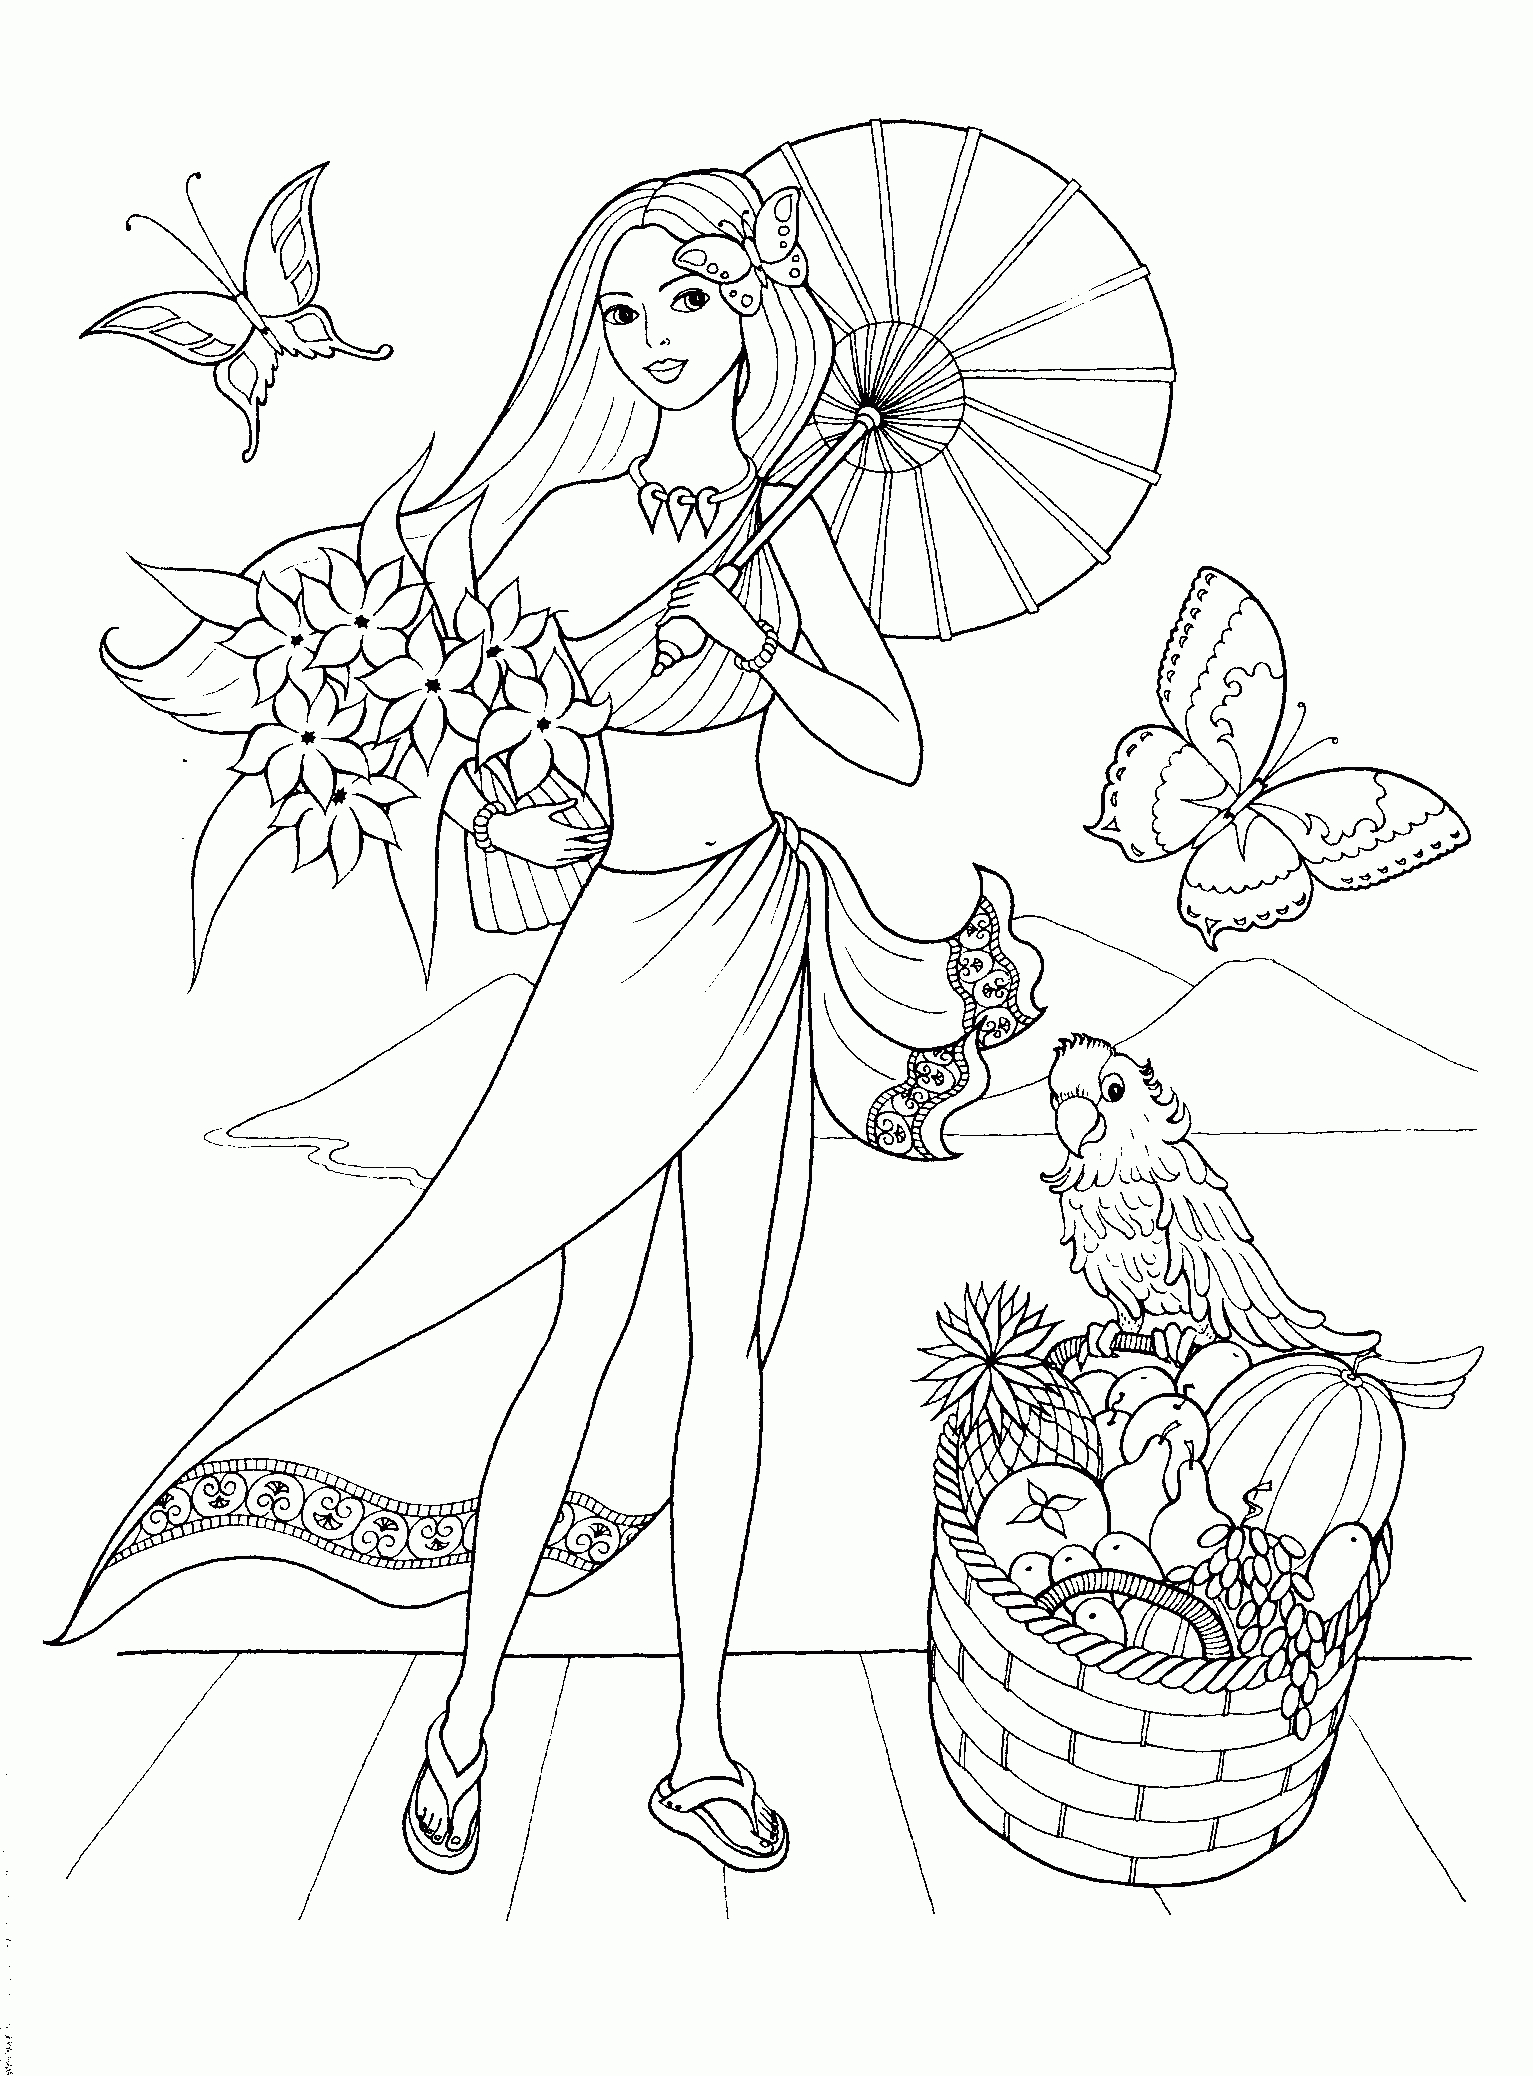 Fashion Coloring Pages | Fashionable Girls Coloring Pages 1 - Free Printables For Girls